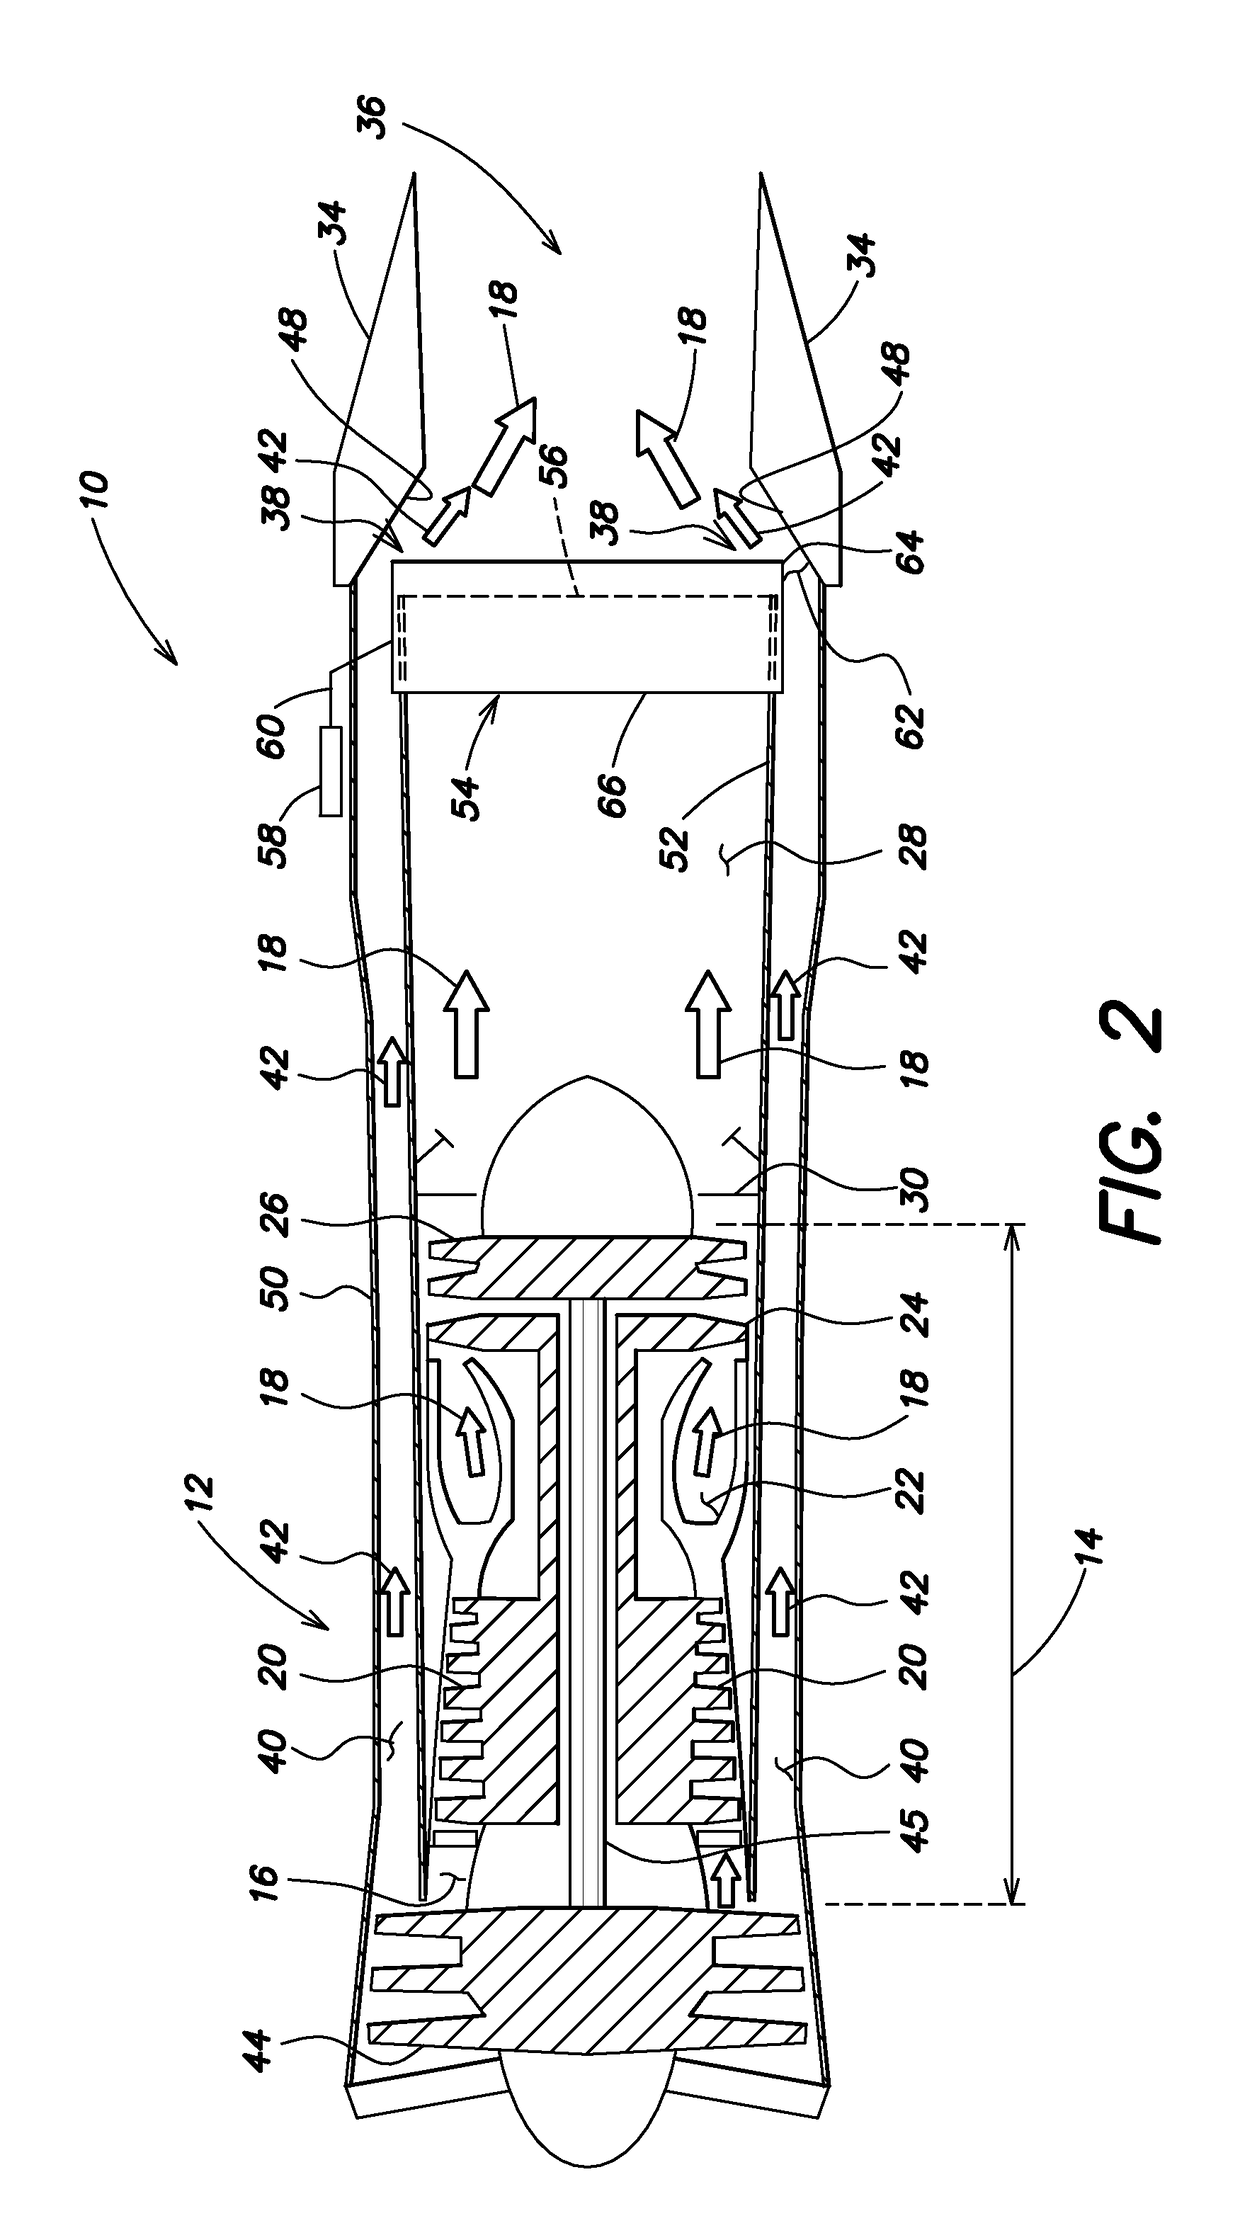 Gas turbine engine system for modulating flow of fan by-pass air and core engine air